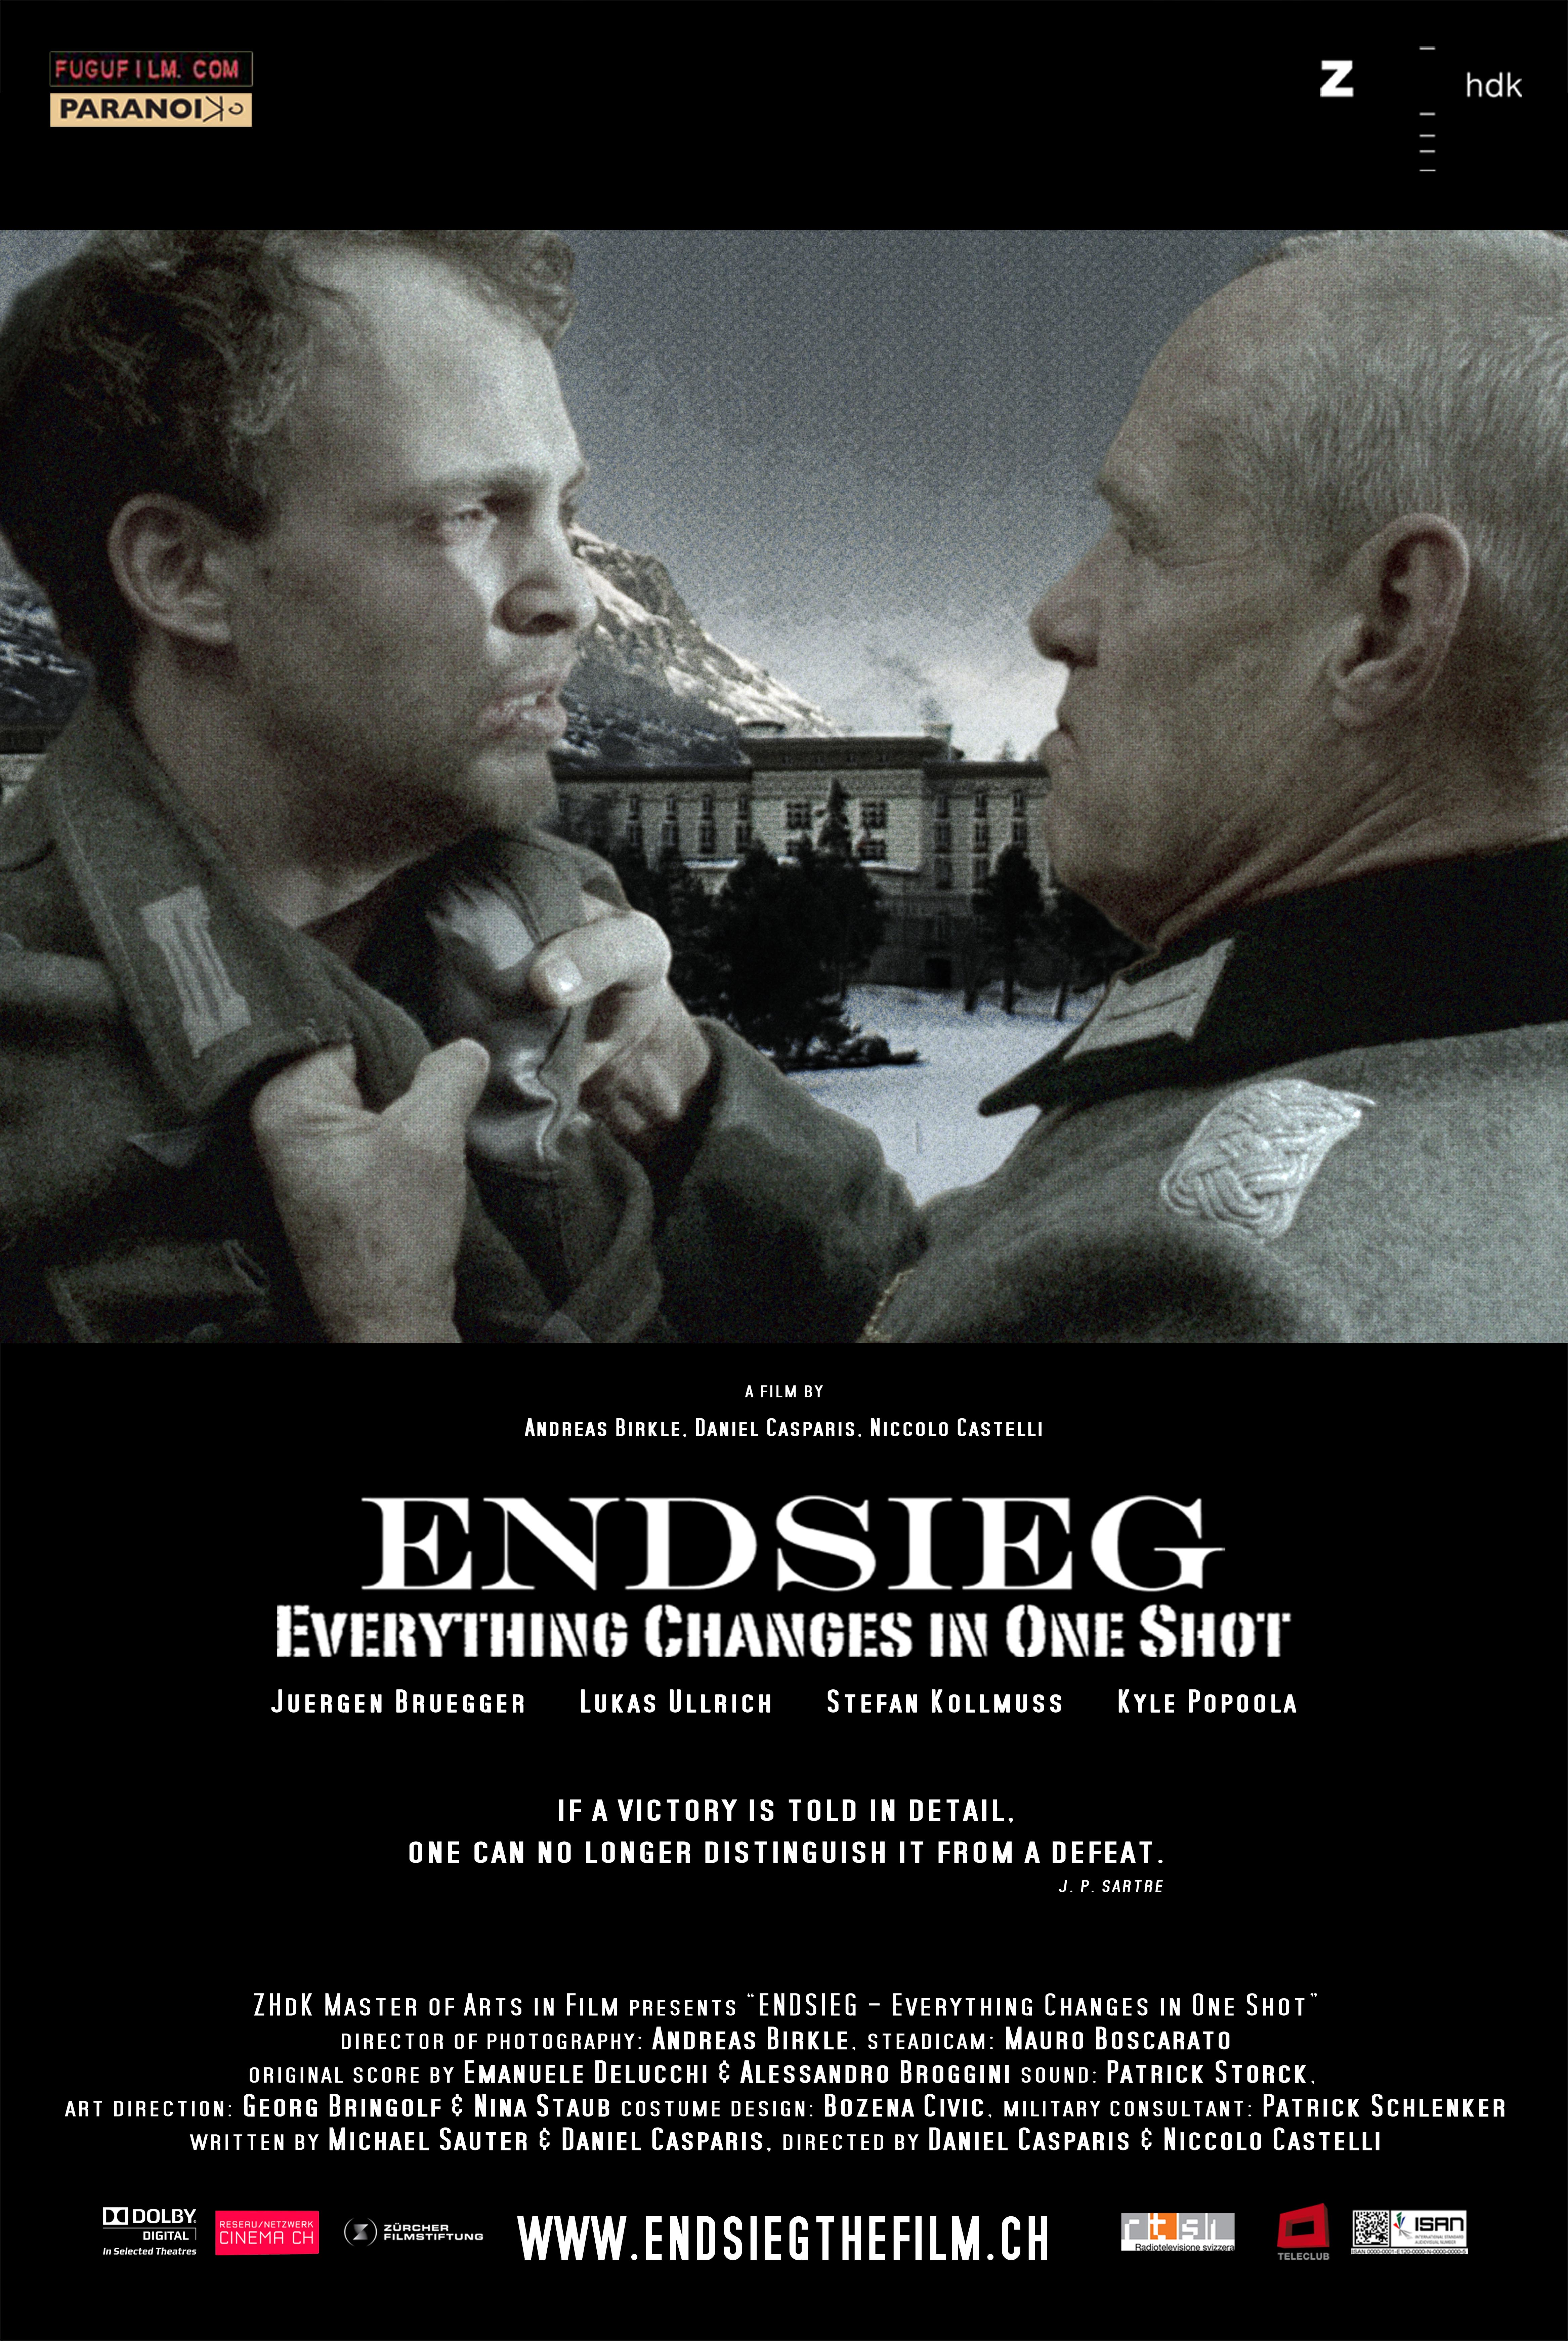 Endsieg - Everything Changes in One Shot (2008) постер